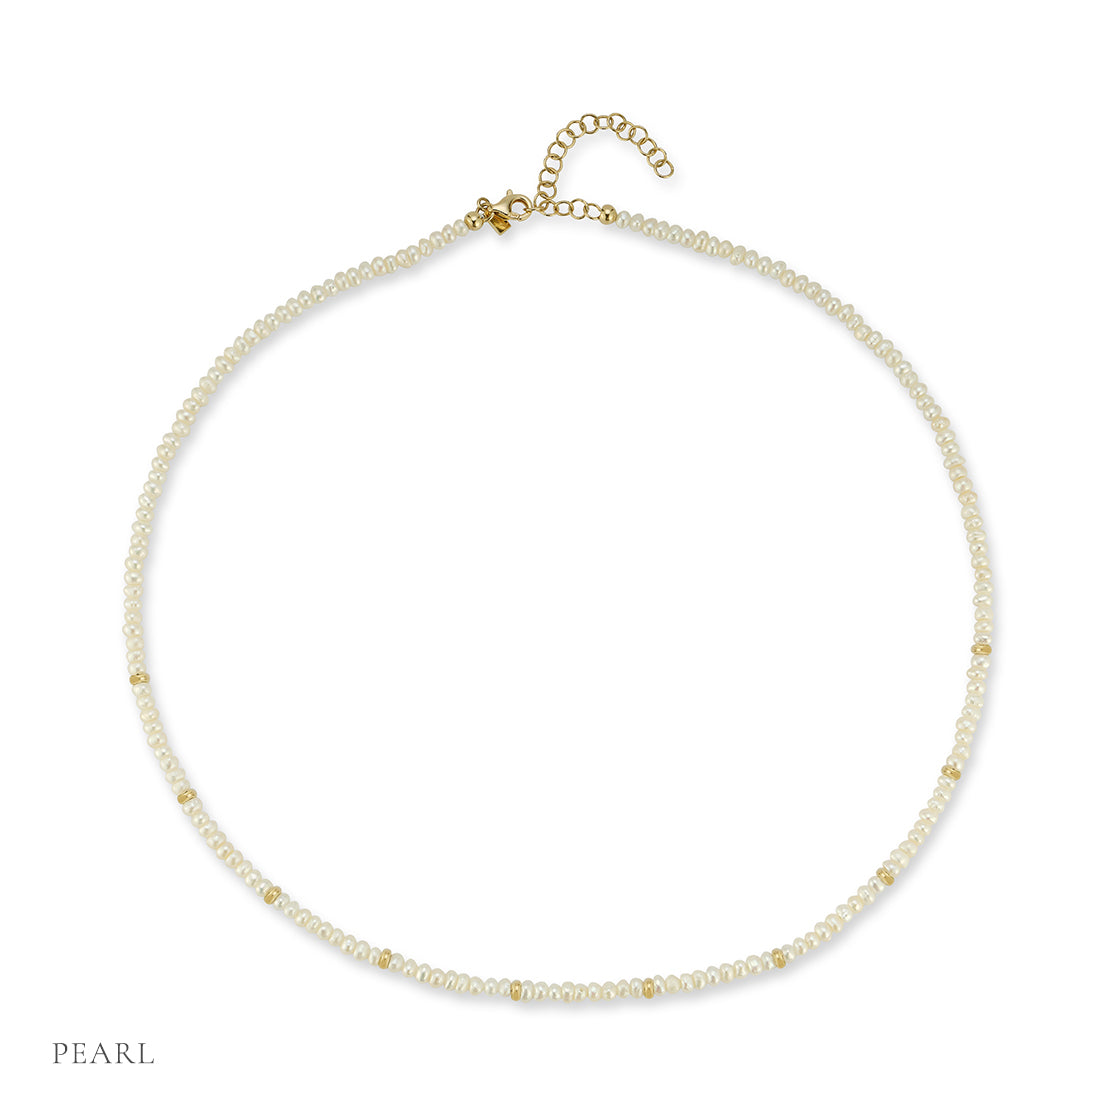 The Beaded Necklace Gift Set - Pearl / June Option